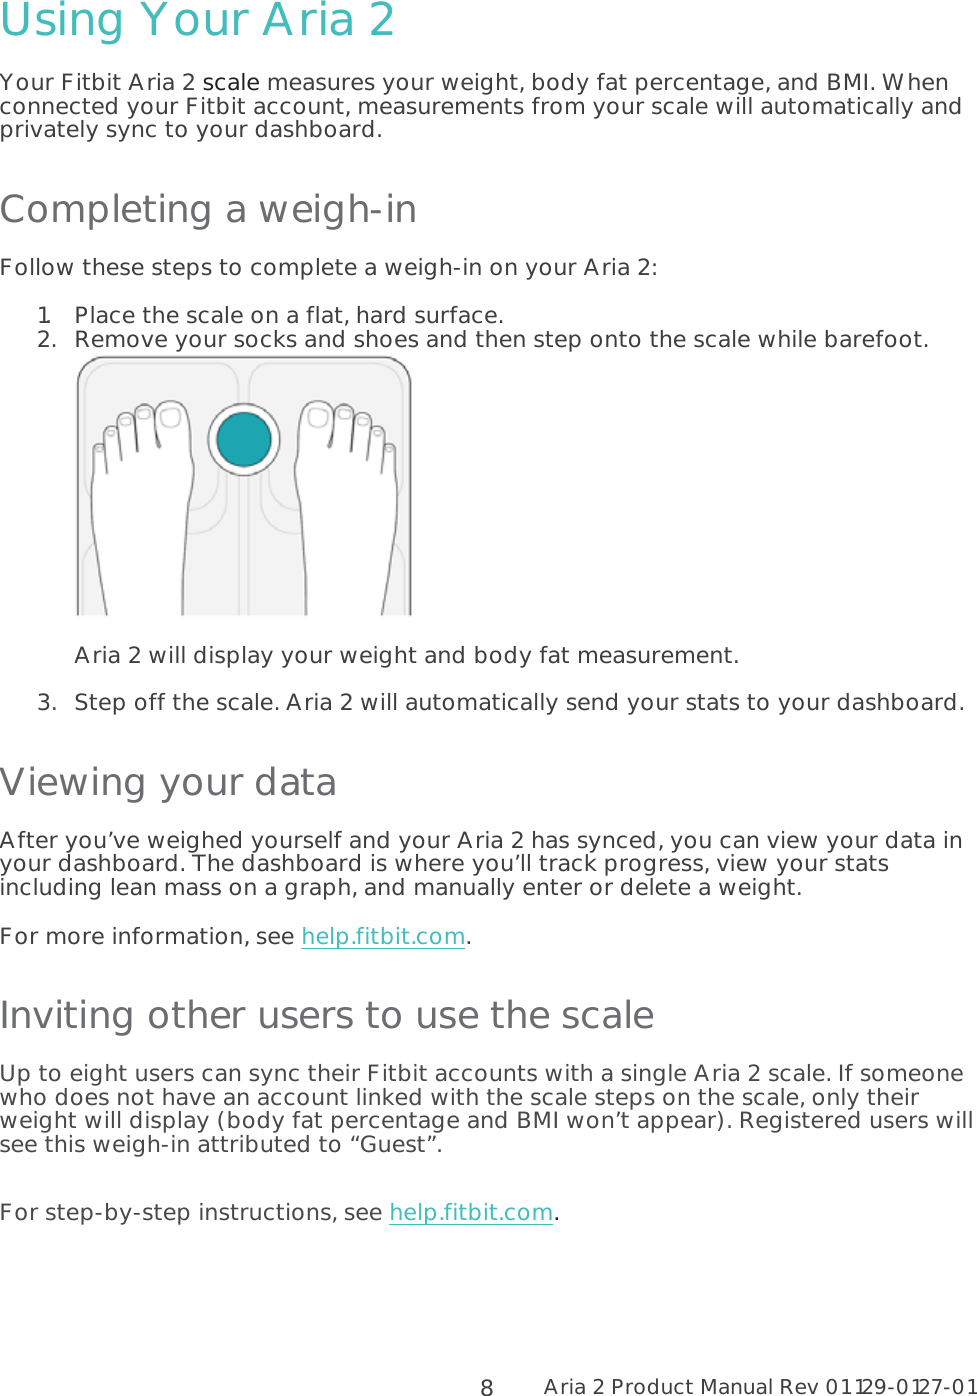 Aria 2 Product Manual Rev 01 129-0127-01  8Using Your Aria 2 Your Fitbit Aria 2 scale measures your weight, body fat percentage, and BMI. When connected your Fitbit account, measurements from your scale will automatically and privately sync to your dashboard.  Completing a weigh-in Follow these steps to complete a weigh-in on your Aria 2: 1.Place the scale on a flat, hard surface.  2.Remove your socks and shoes and then step onto the scale while barefoot.    Aria 2 will display your weight and body fat measurement.   3.Step off the scale. Aria 2 will automatically send your stats to your dashboard.  Viewing your data After you’ve weighed yourself and your Aria 2 has synced, you can view your data in your dashboard. The dashboard is where you’ll track progress, view your stats including lean mass on a graph, and manually enter or delete a weight.  For more information, see help.fitbit.com.  Inviting other users to use the scale Up to eight users can sync their Fitbit accounts with a single Aria 2 scale. If someone who does not have an account linked with the scale steps on the scale, only their weight will display (body fat percentage and BMI won’t appear). Registered users will see this weigh-in attributed to “Guest”.  For step-by-step instructions, see help.fitbit.com.  